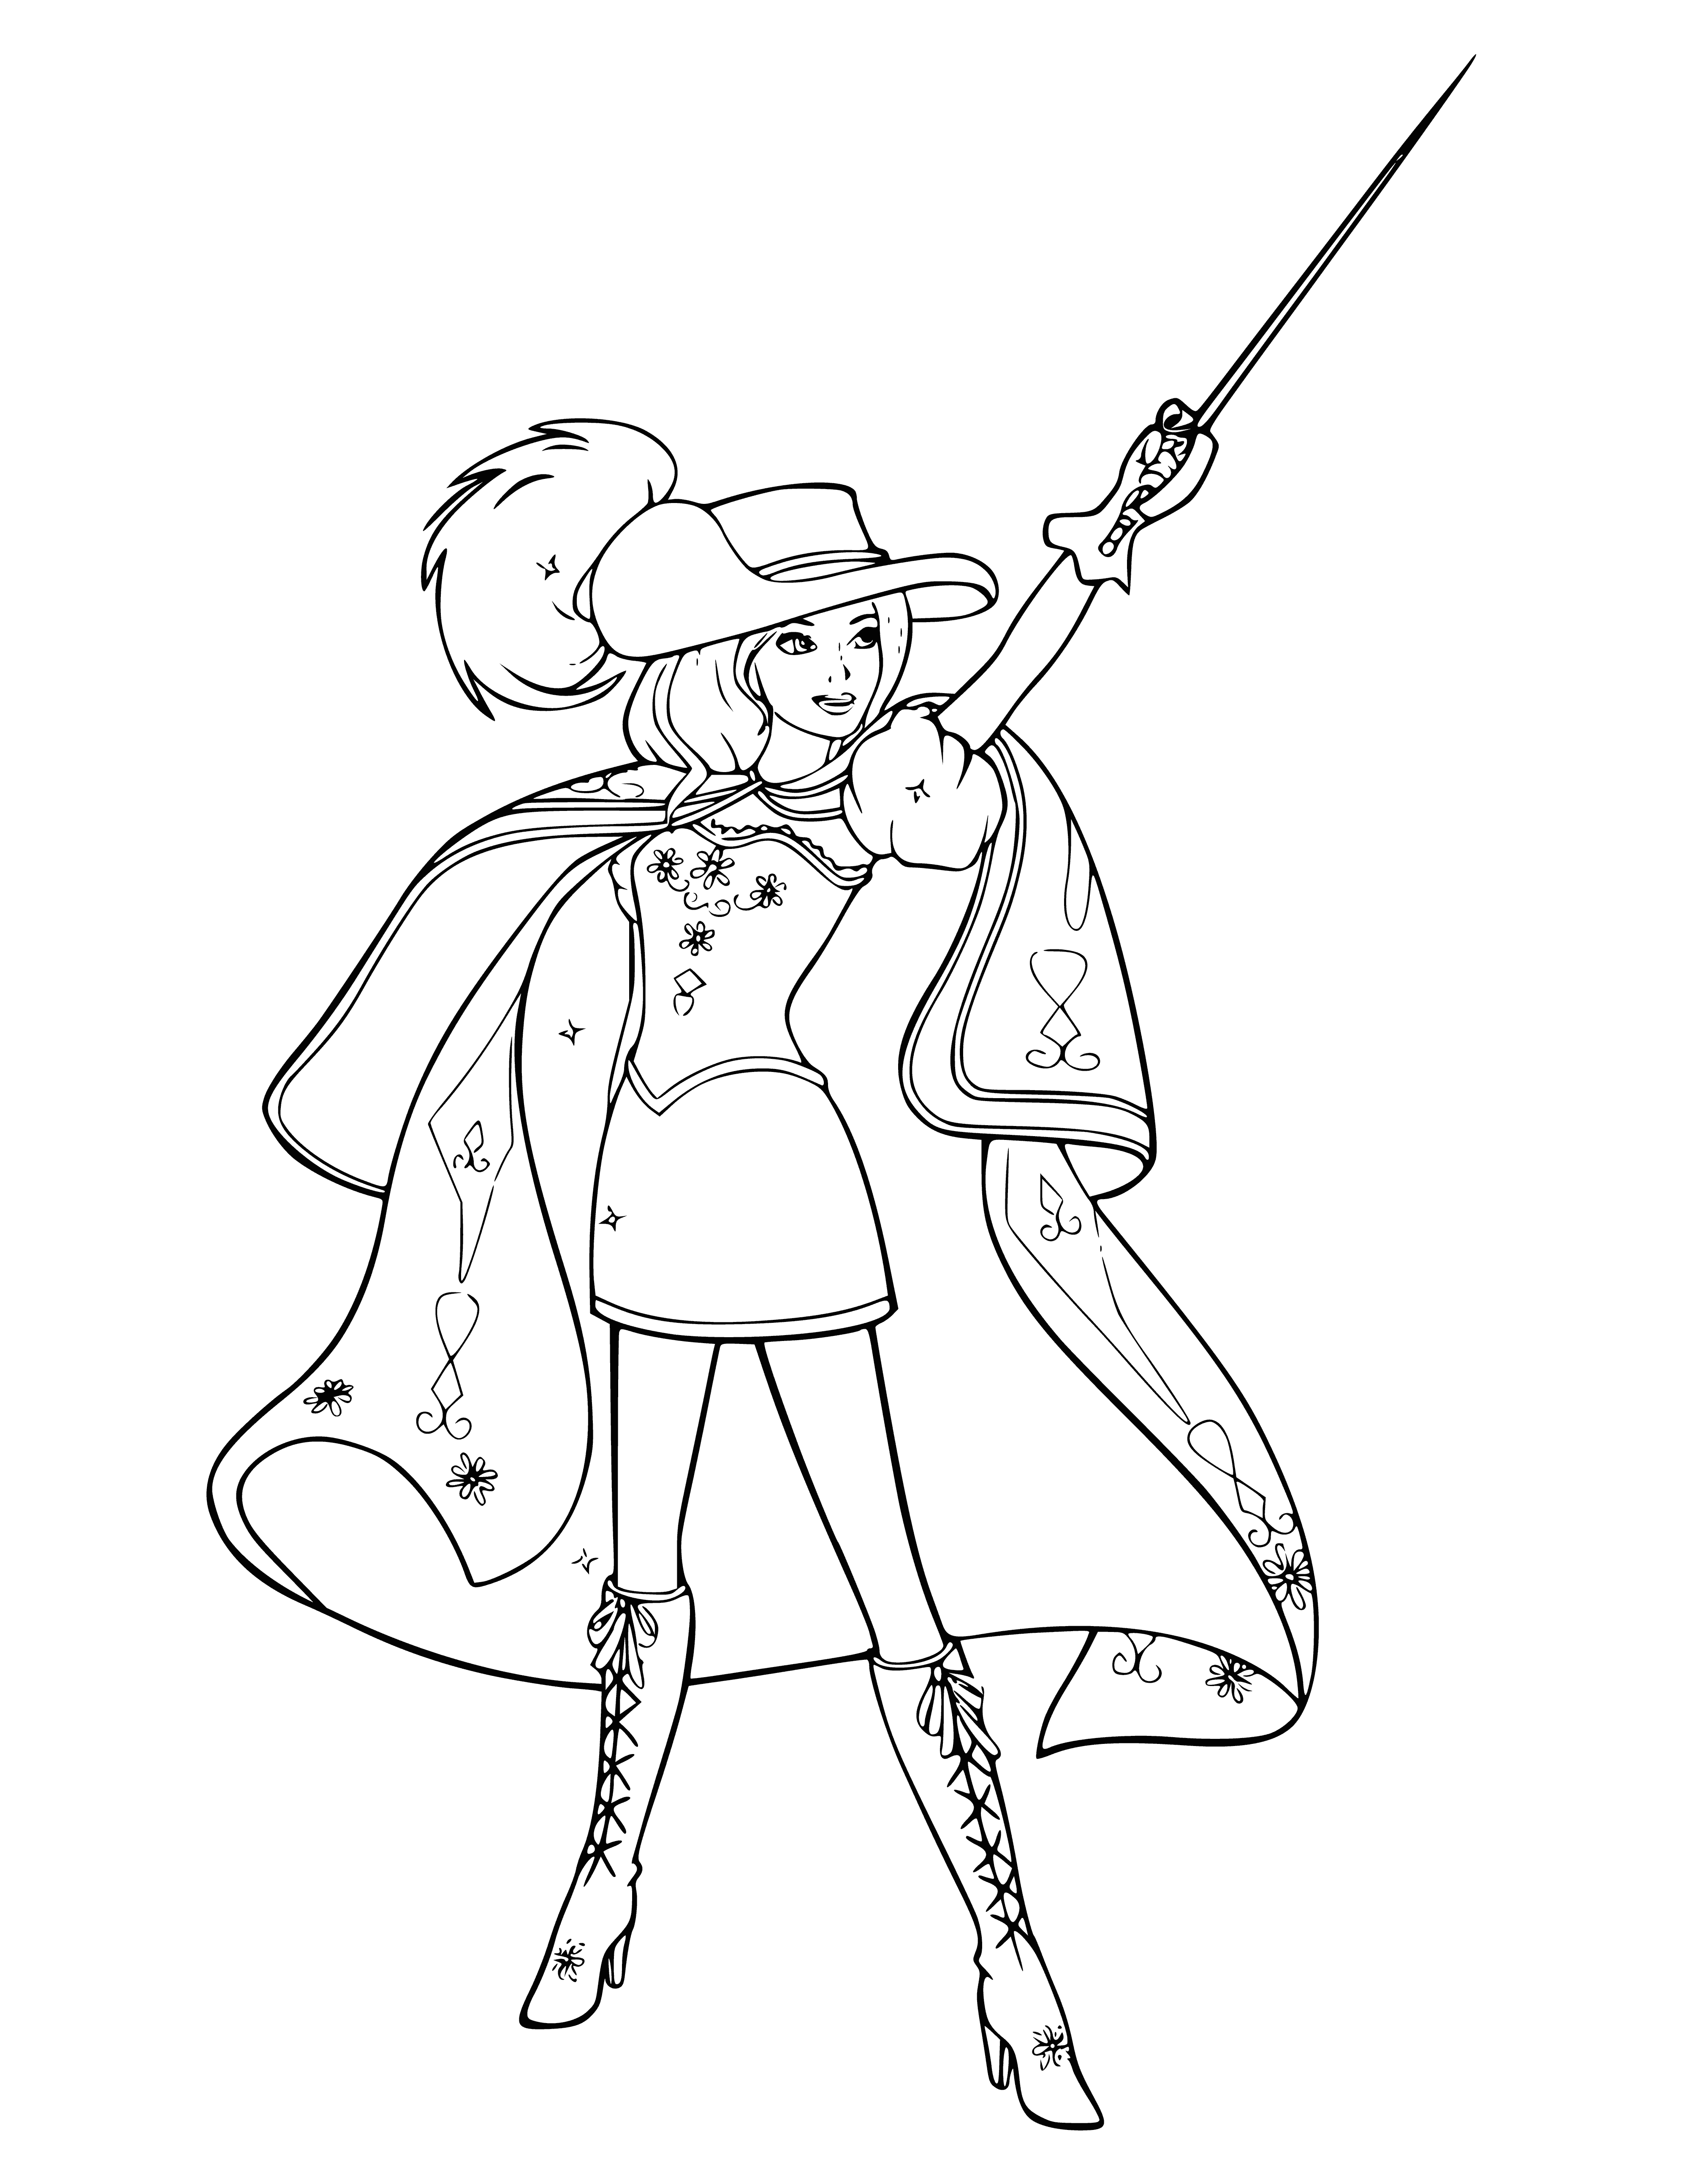 Barbie in musketeer costume coloring page